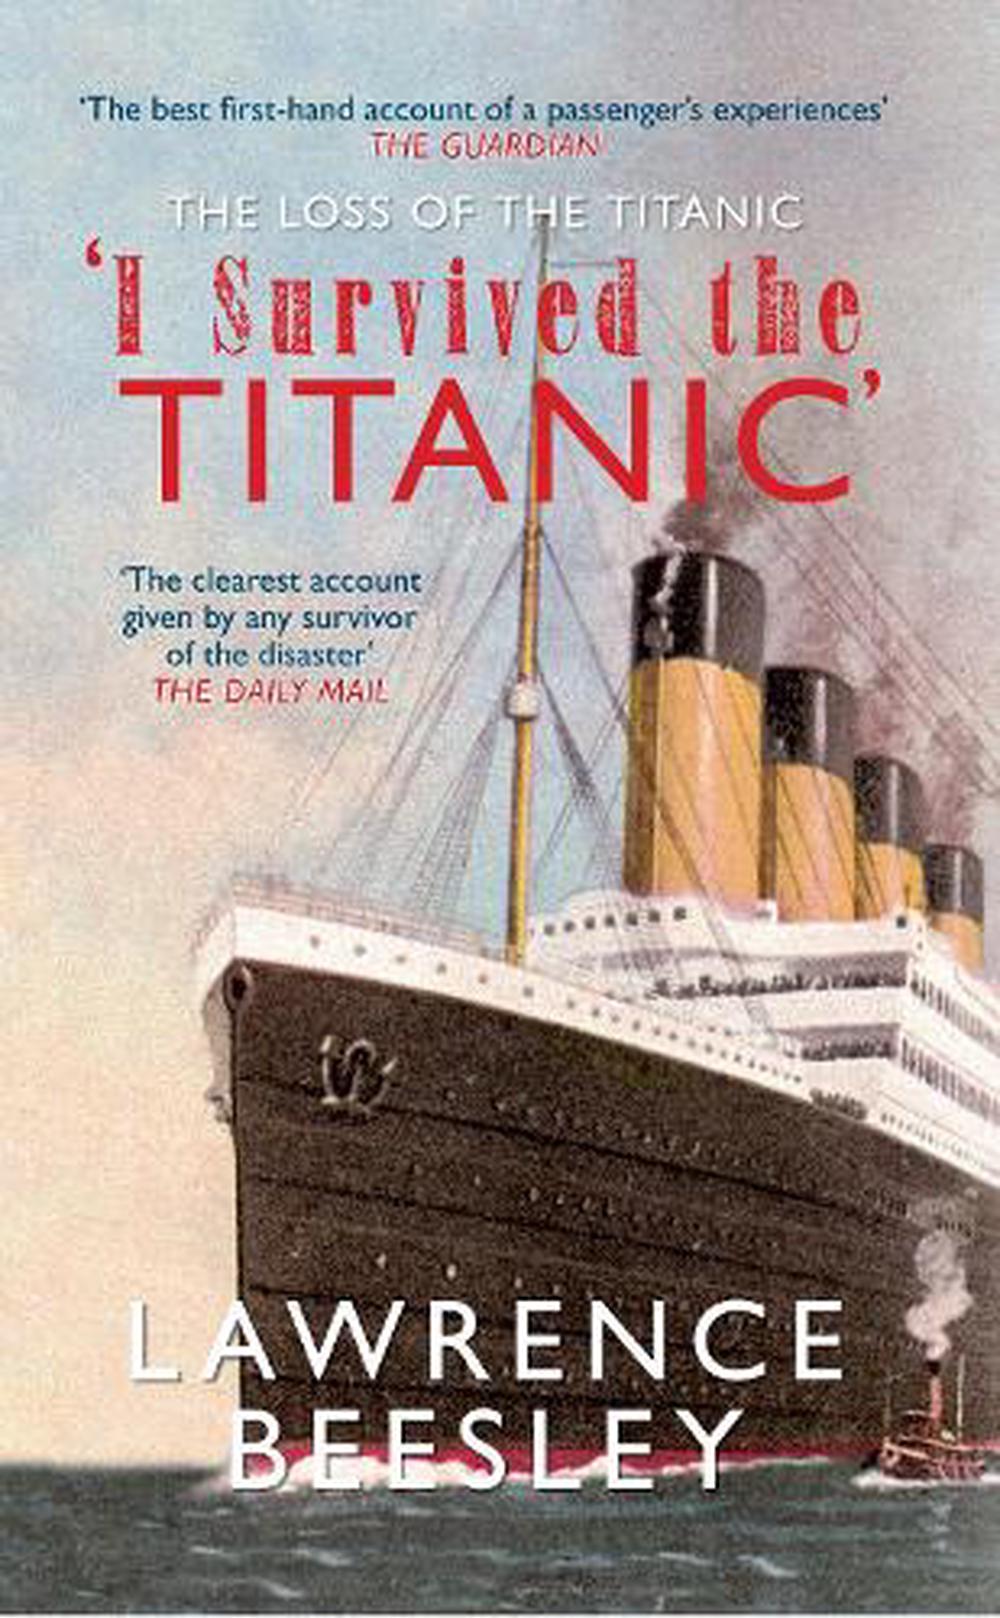 the loss of the titanic by sir arthur essay